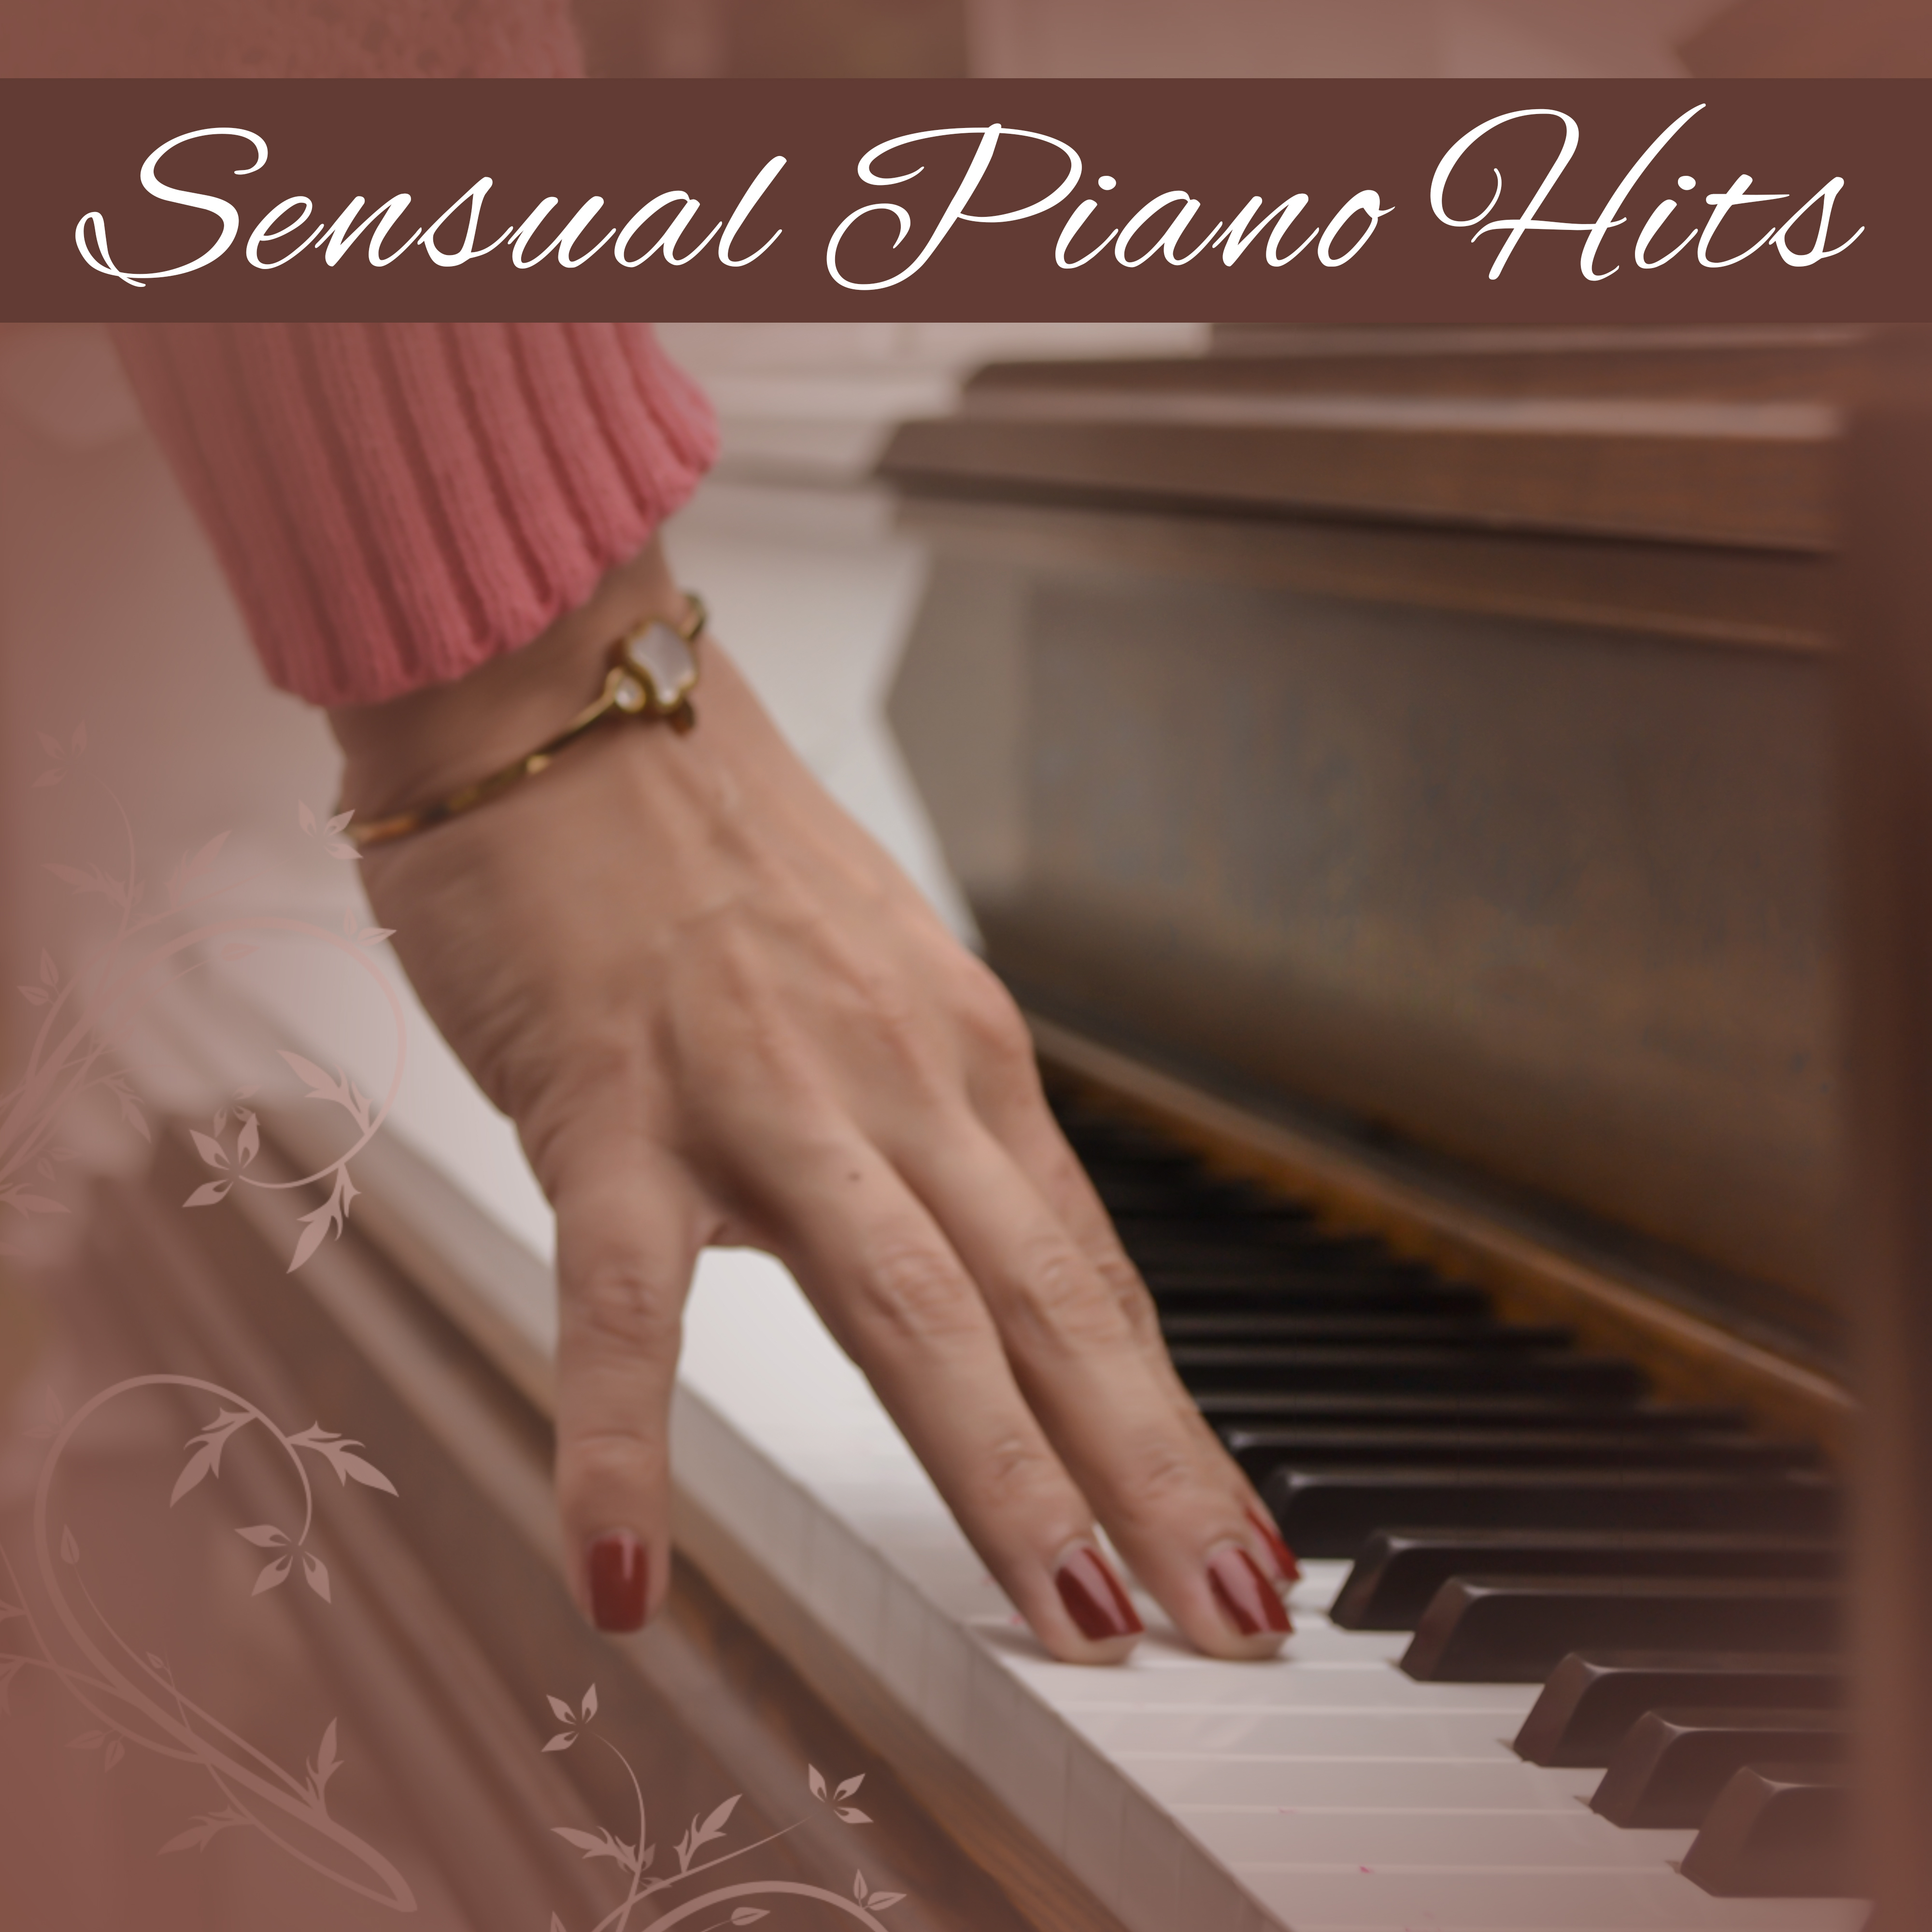 Sensual Piano Hits  Relaxed Music, Smooth Jazz, Romantic Music, Easy Listening Jazz Instrumental